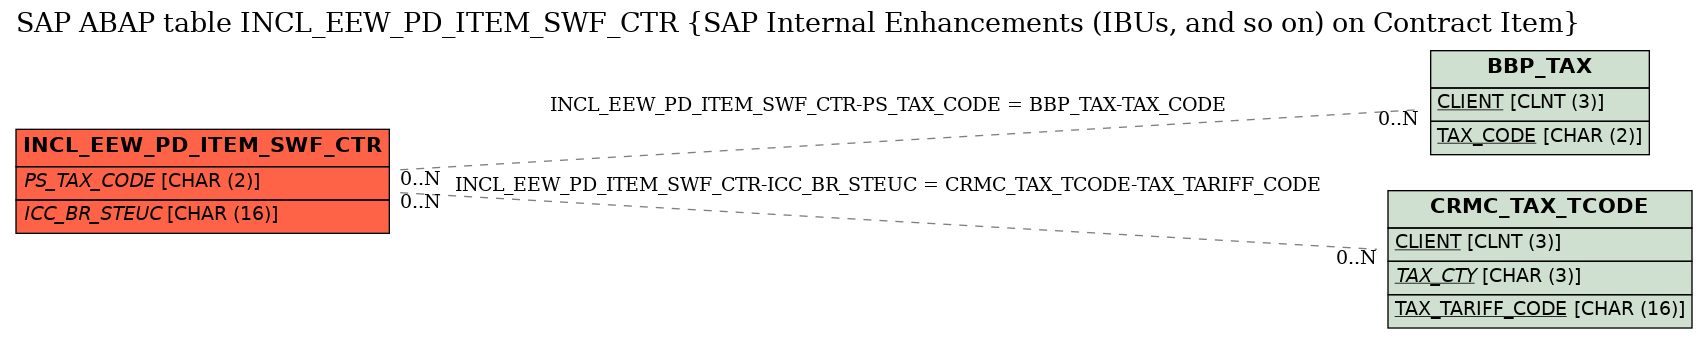 E-R Diagram for table INCL_EEW_PD_ITEM_SWF_CTR (SAP Internal Enhancements (IBUs, and so on) on Contract Item)